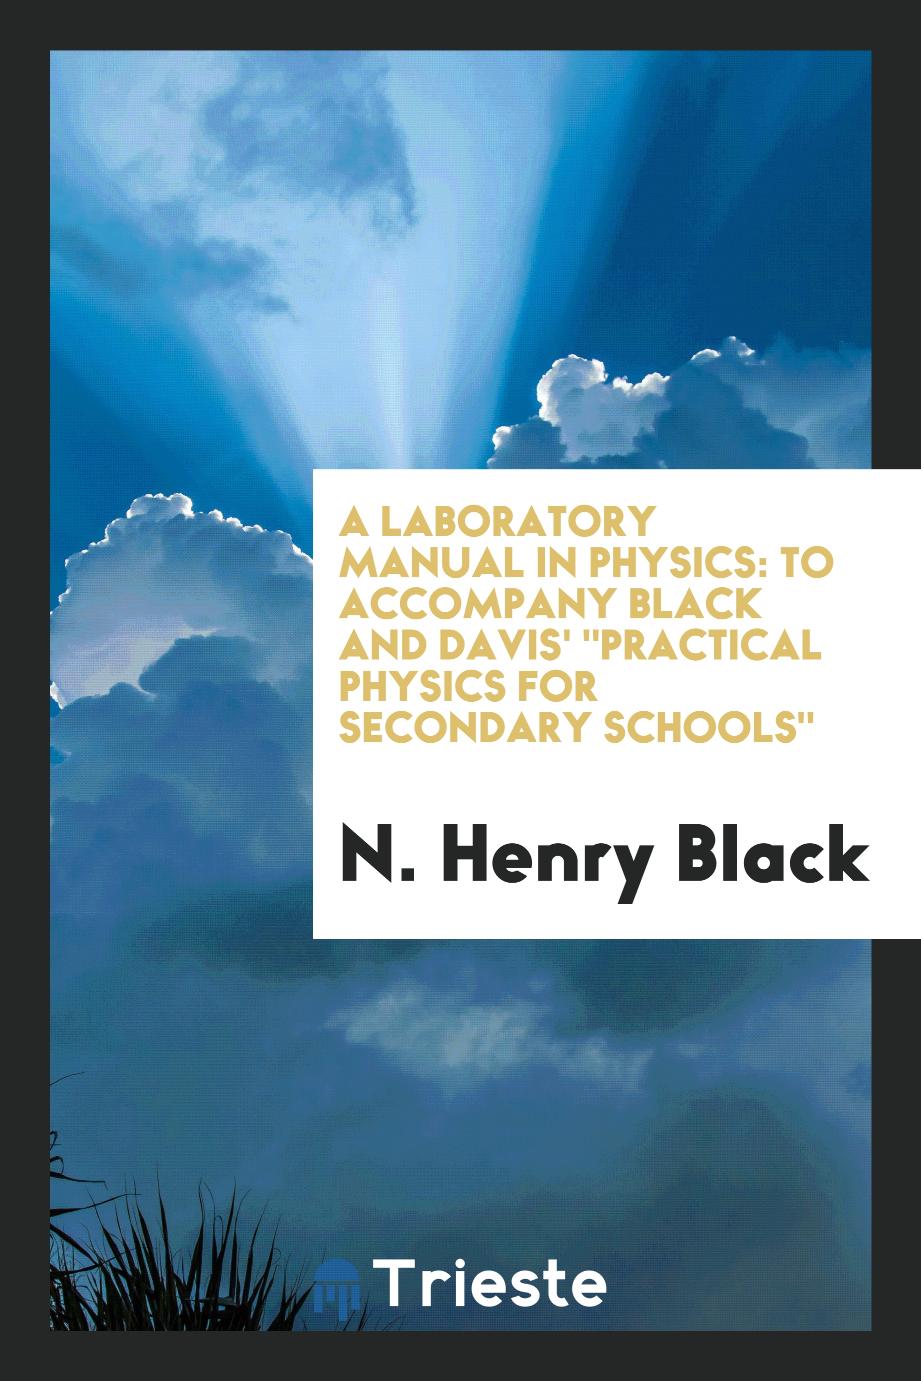 A Laboratory Manual in Physics: To Accompany Black and Davis' "Practical Physics for Secondary Schools"